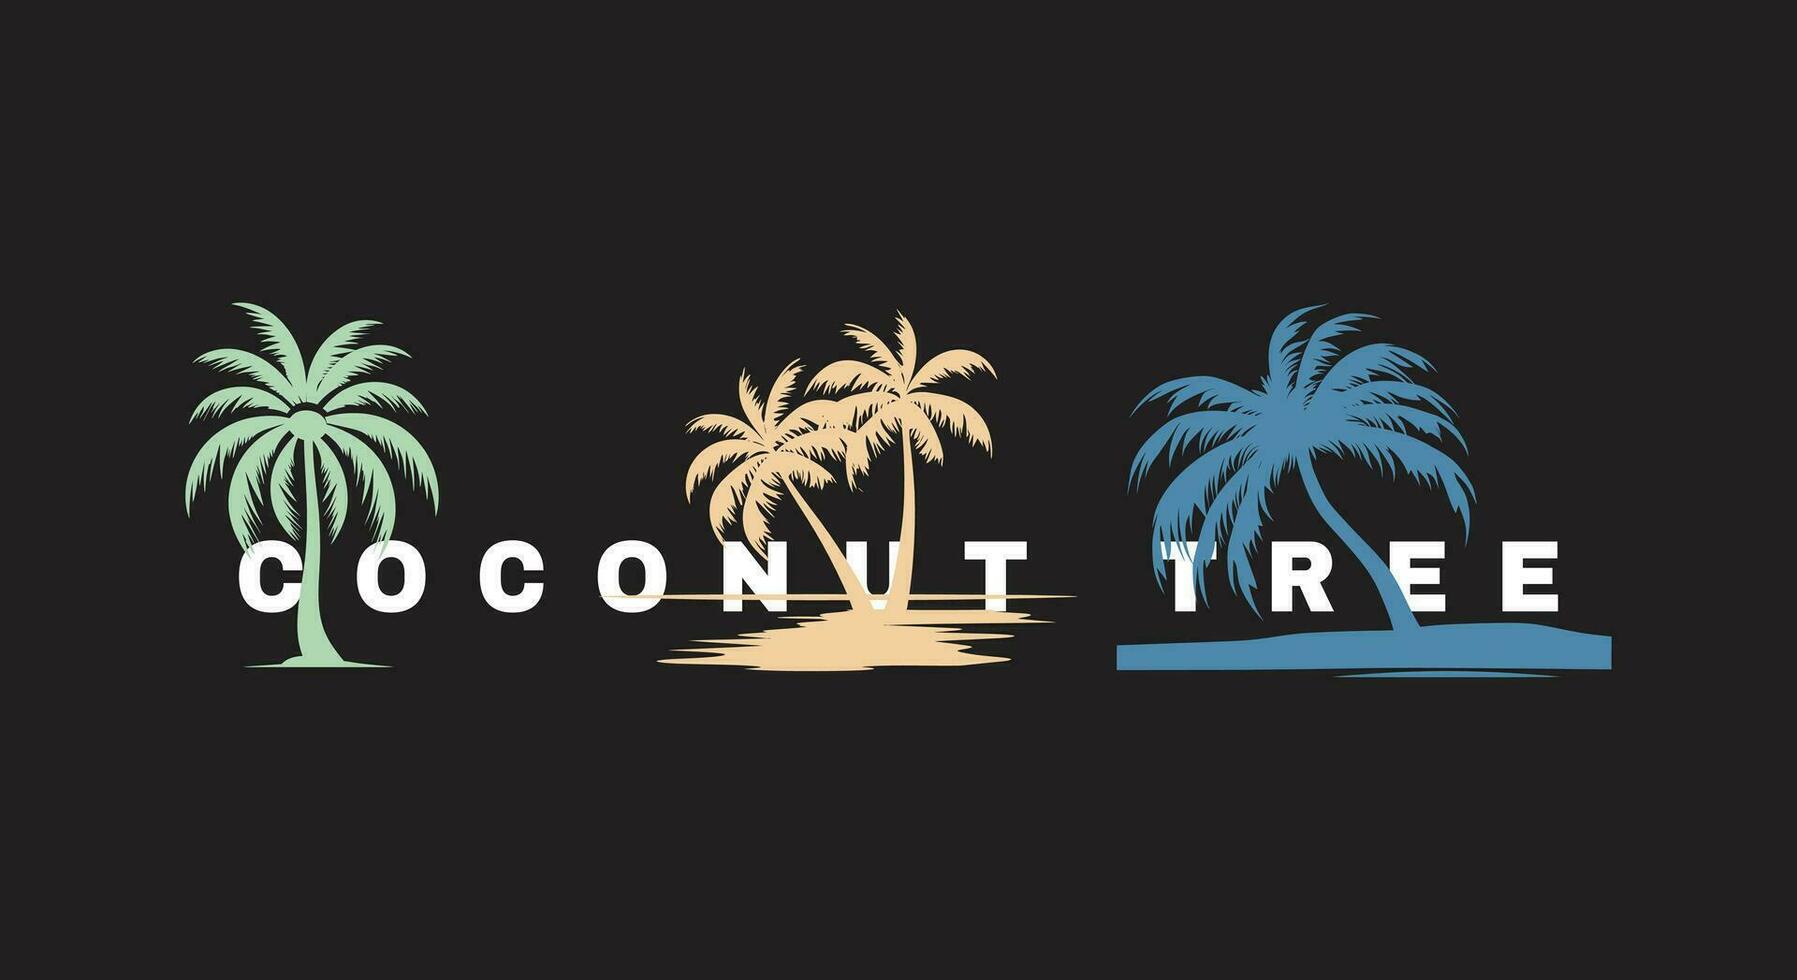 Coconut Tree Vector Patterns   Stylish Designs for Print and Web Applications